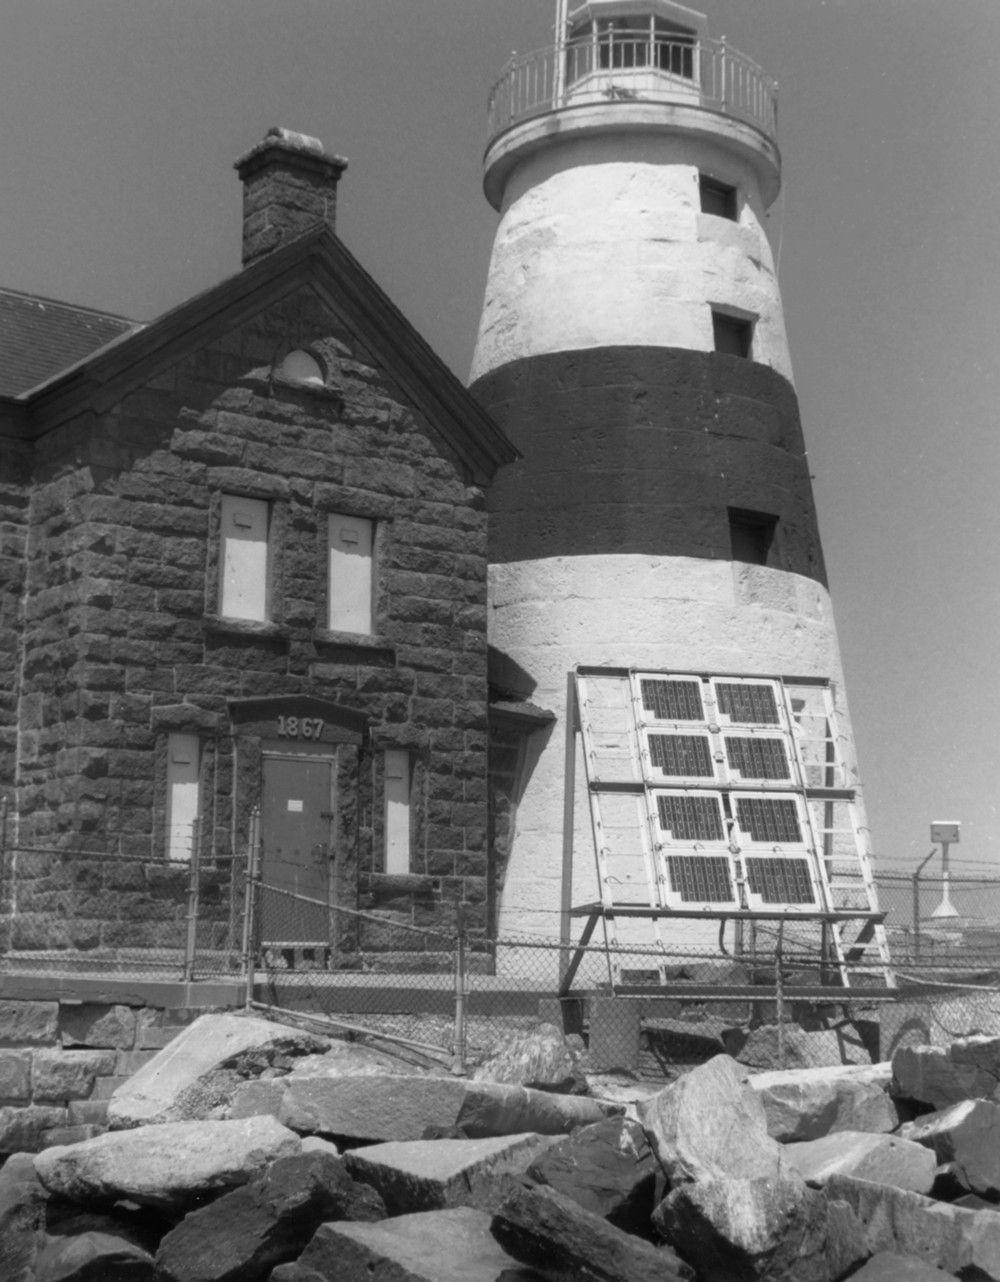 Execution Rocks Lighthouse, Port Washington New York Keepers' quarters and lighthouse exterior view looking north (2004)